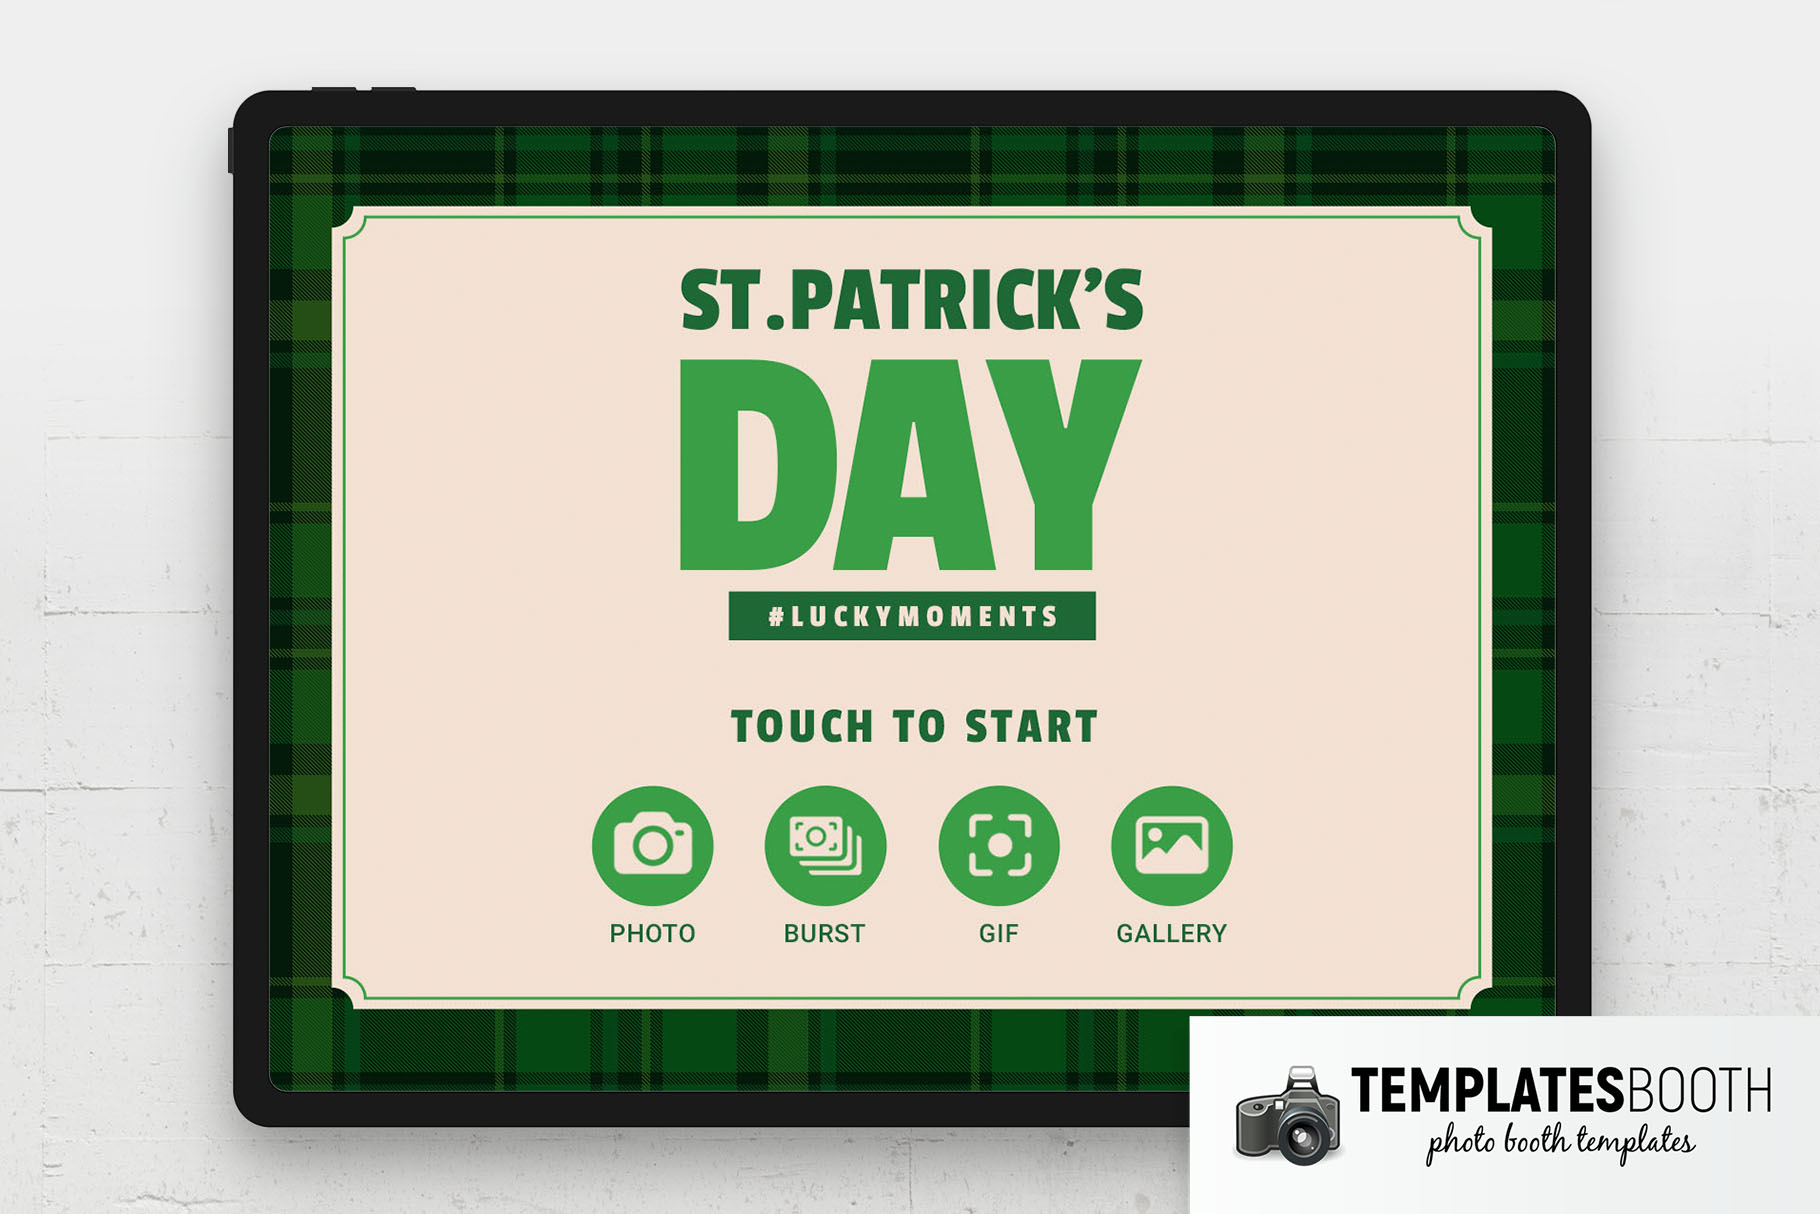 St Patrick's Day Photo Booth Welcome Screen